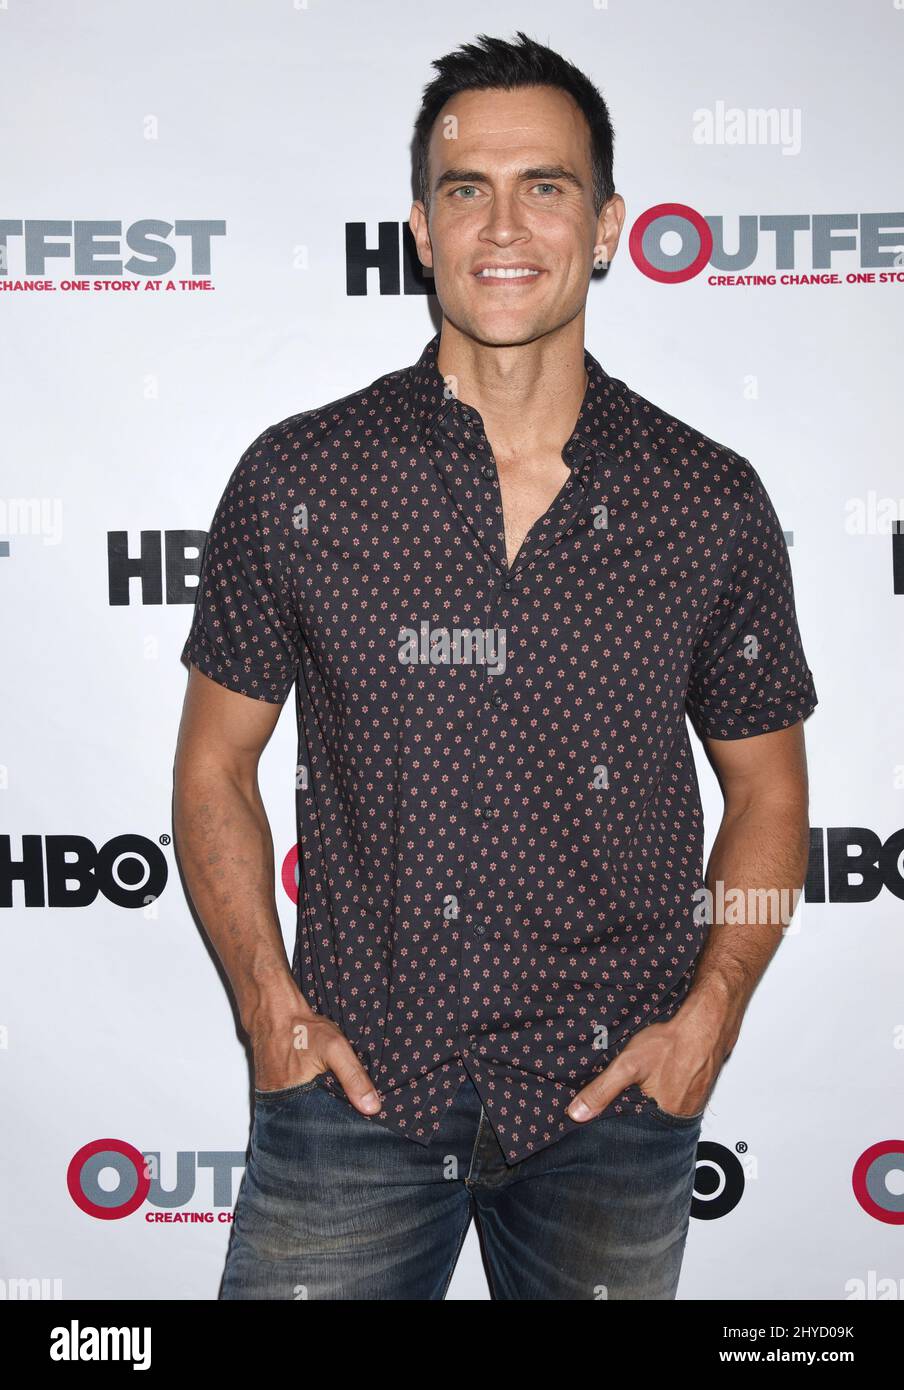 Cheyenne Jackson arriving for the Hello Again screening held at the Directors Guild of America Theatre, Los Angeles, July 11, 2017, part of 2017 Outfest LGBT Film Festival Stock Photo